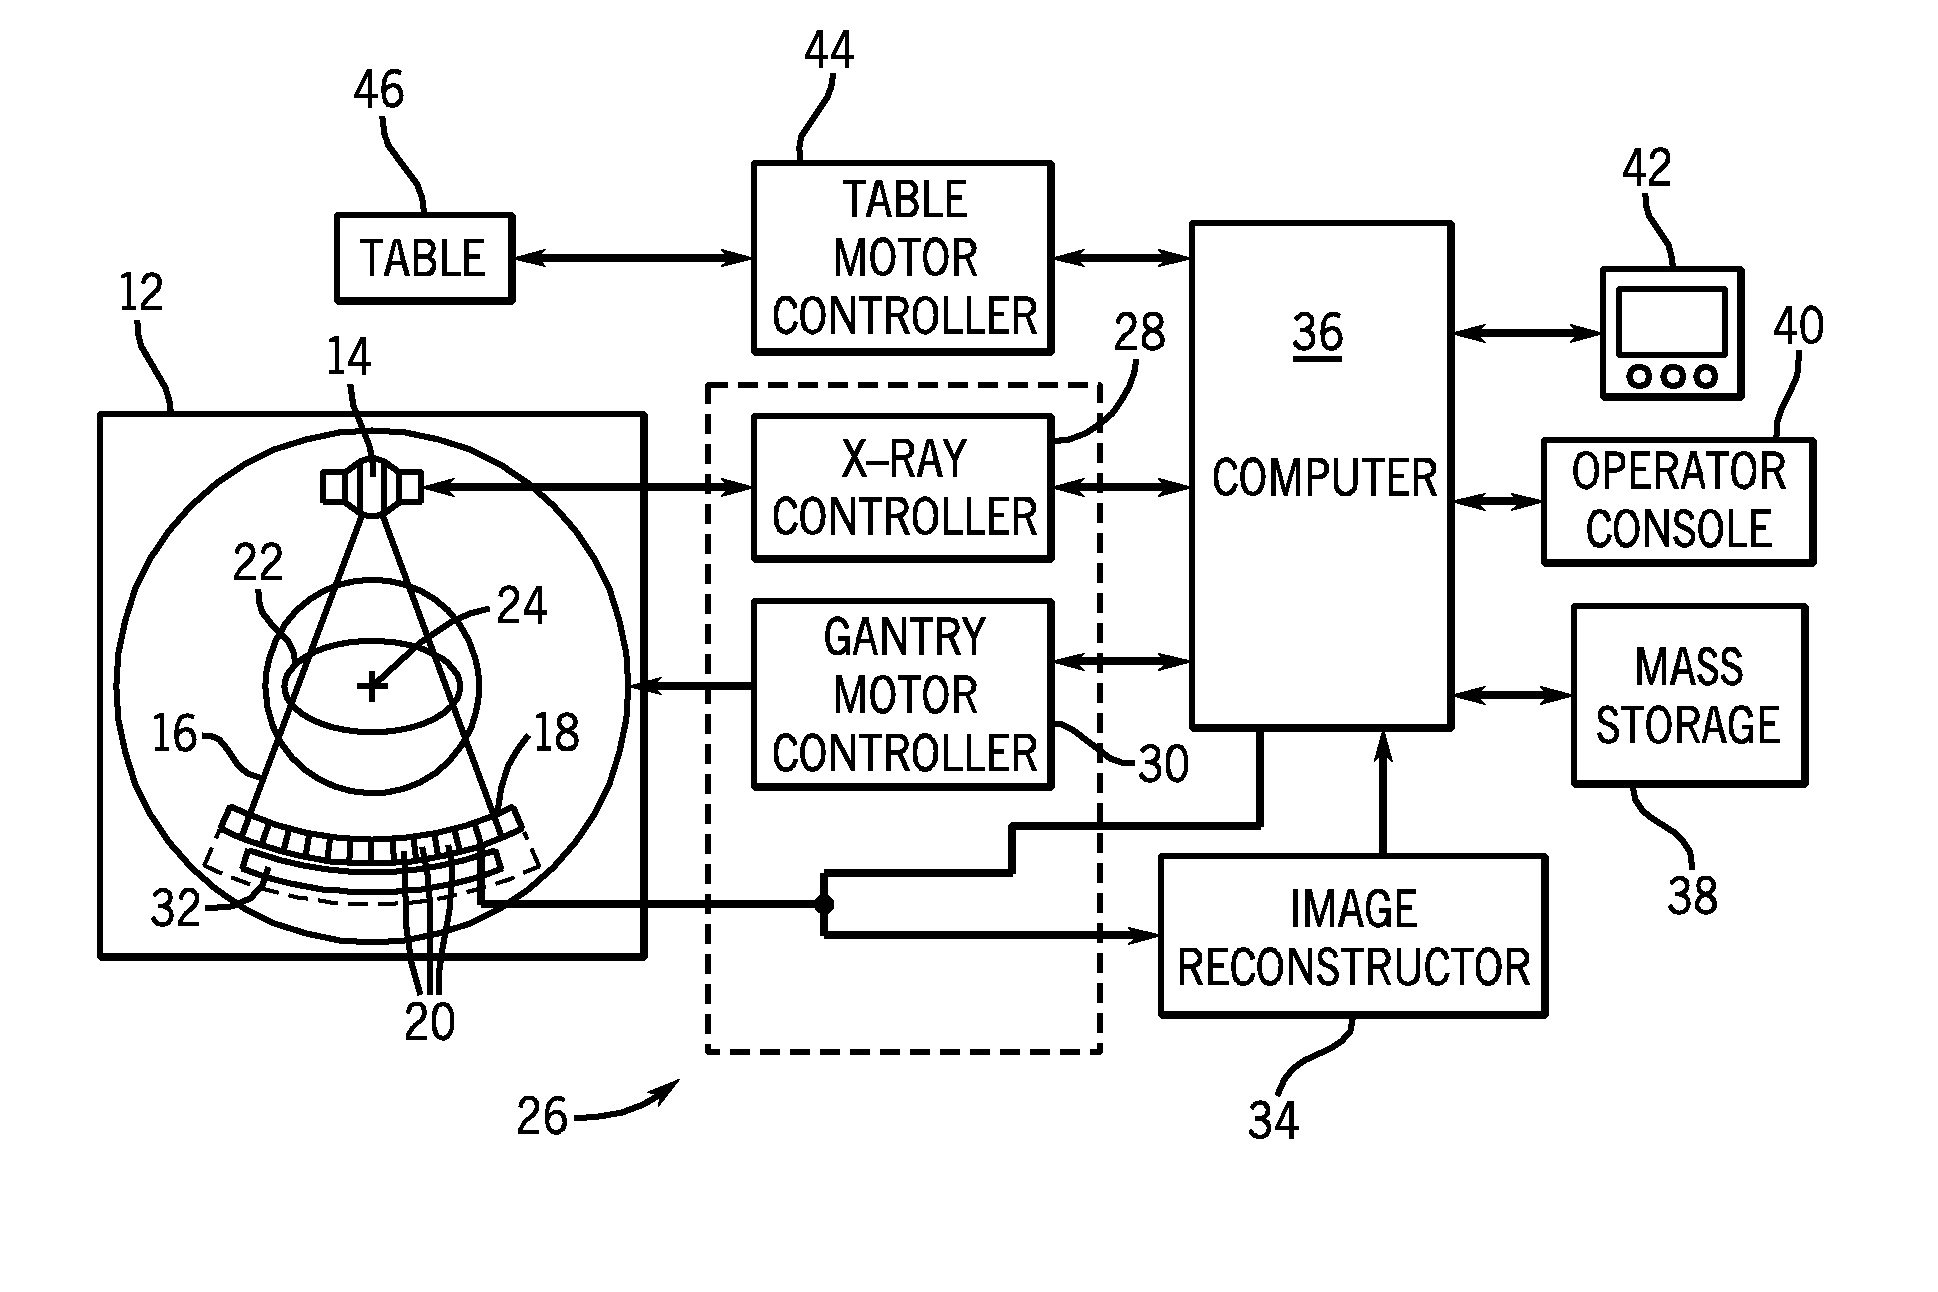 Photon counting x-ray detector with overrange logic control